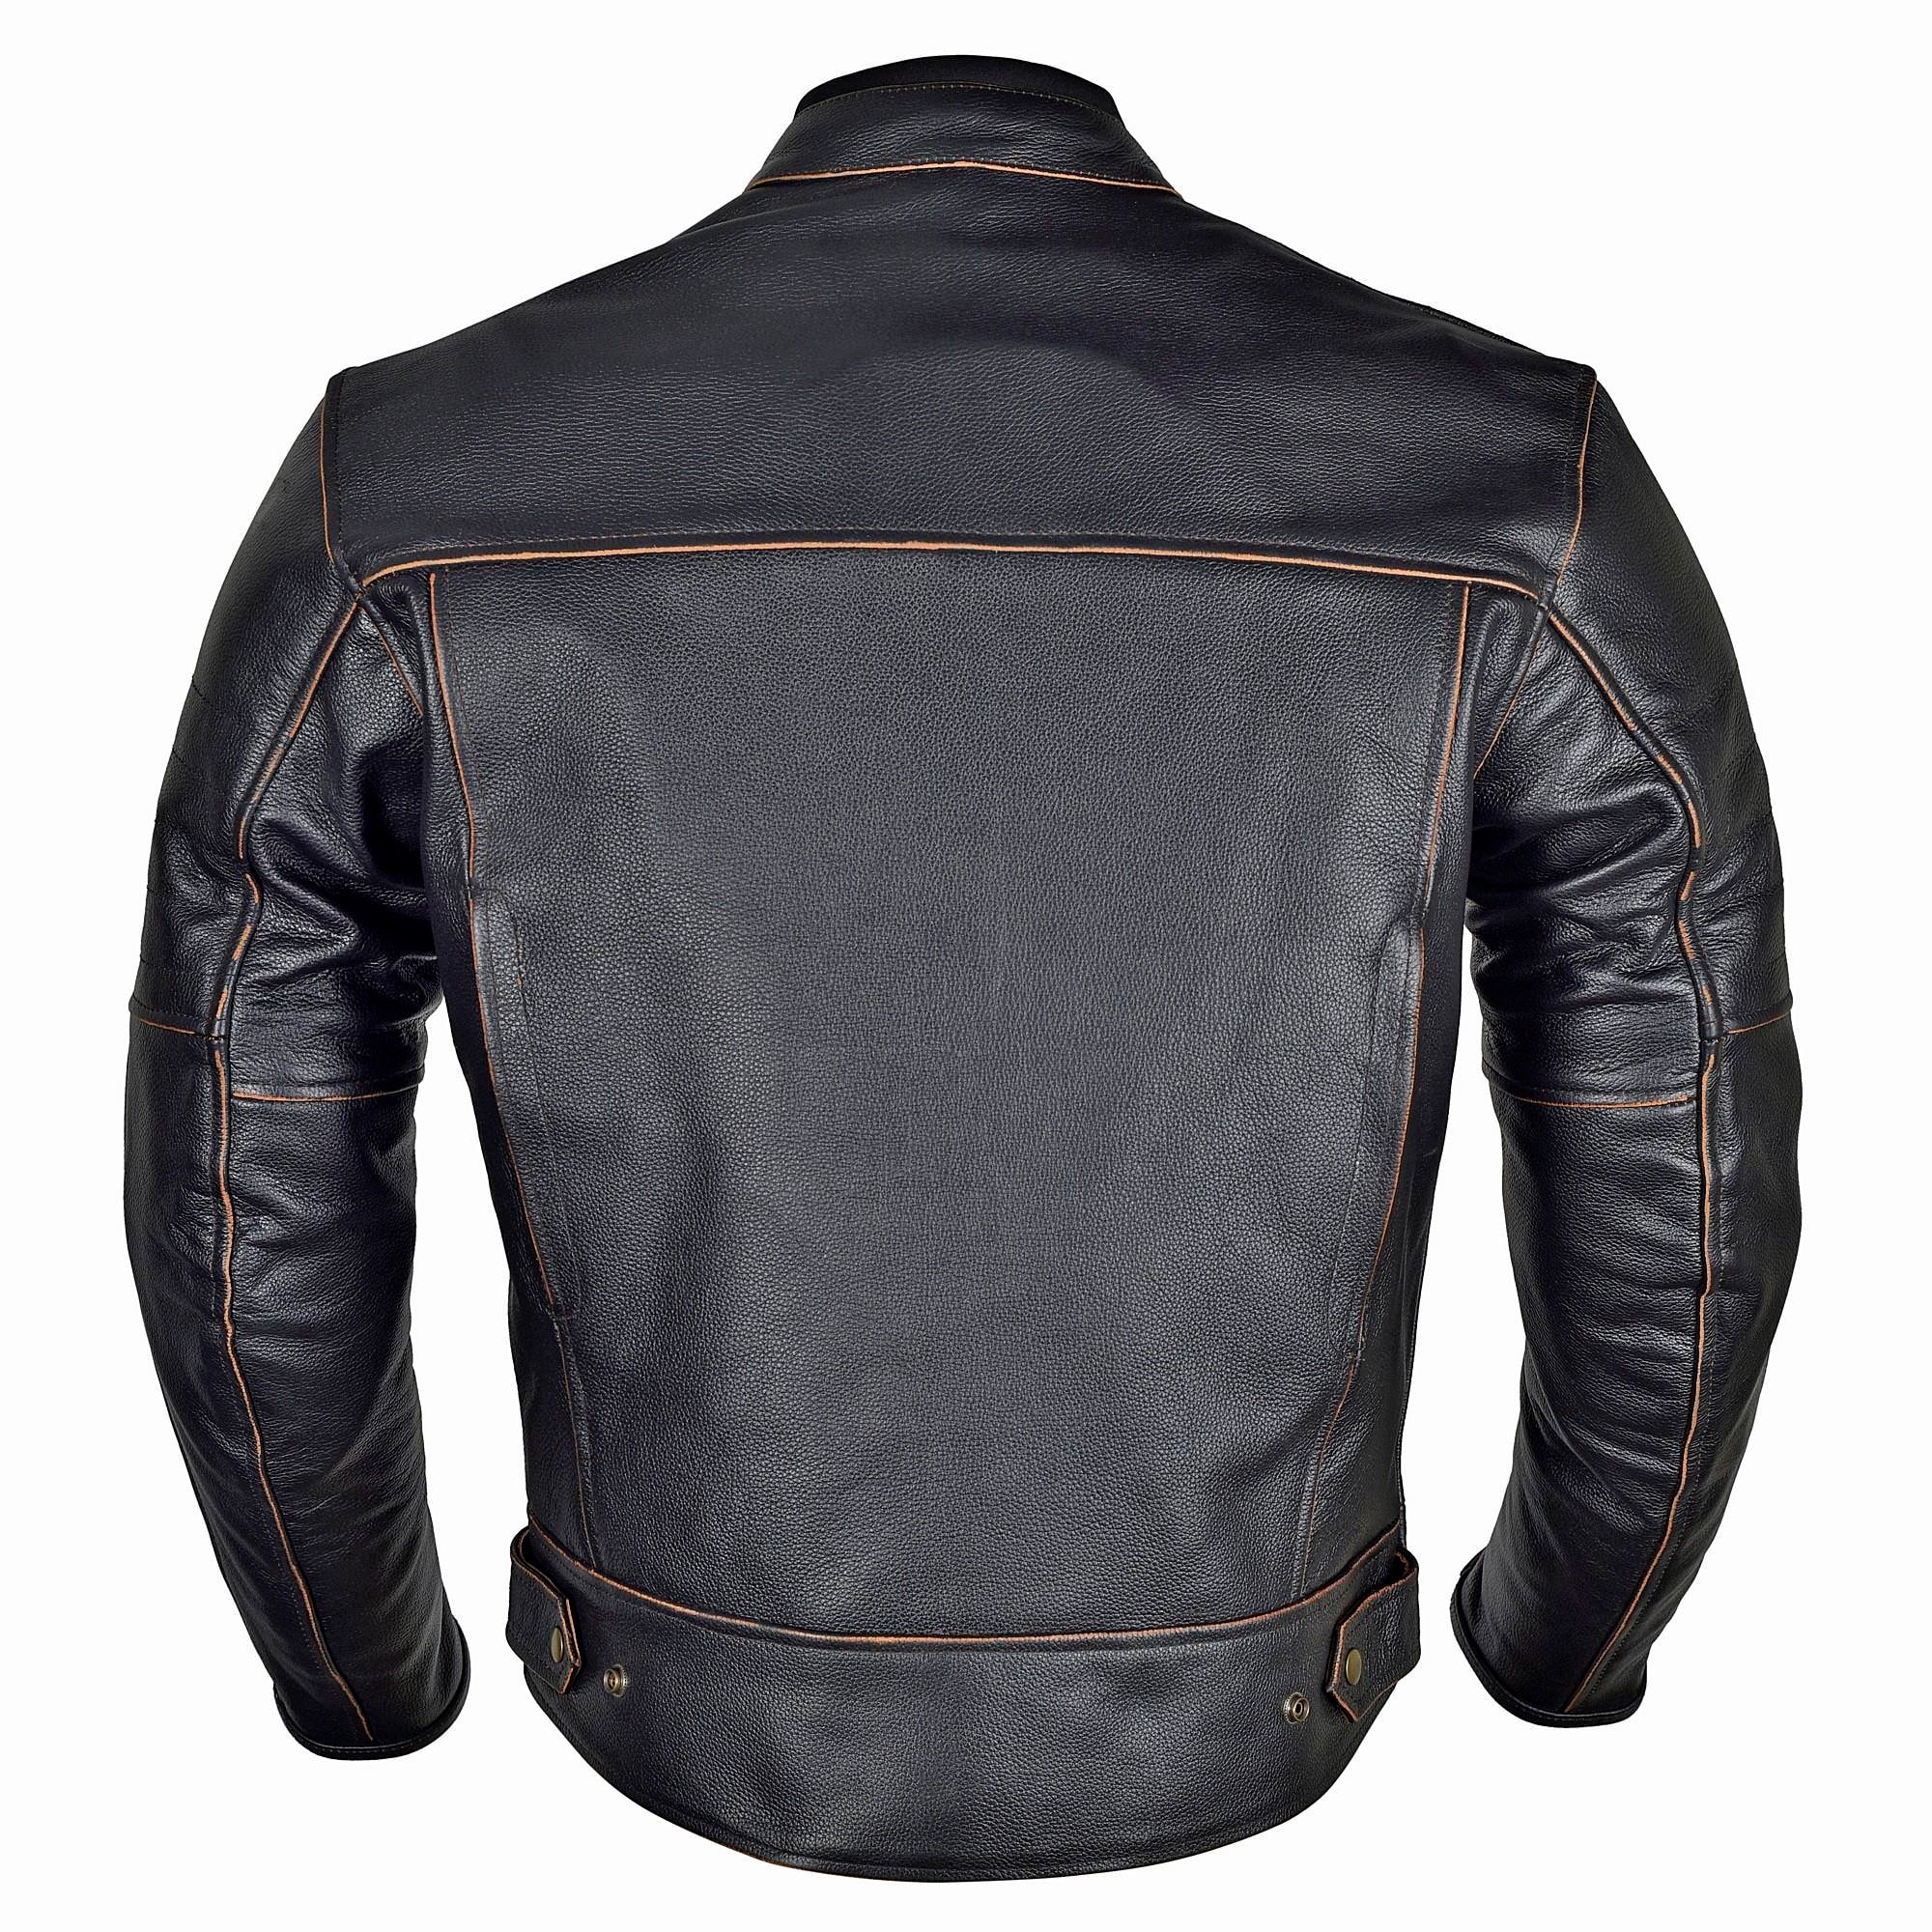 motorcycle jackets for men with armor